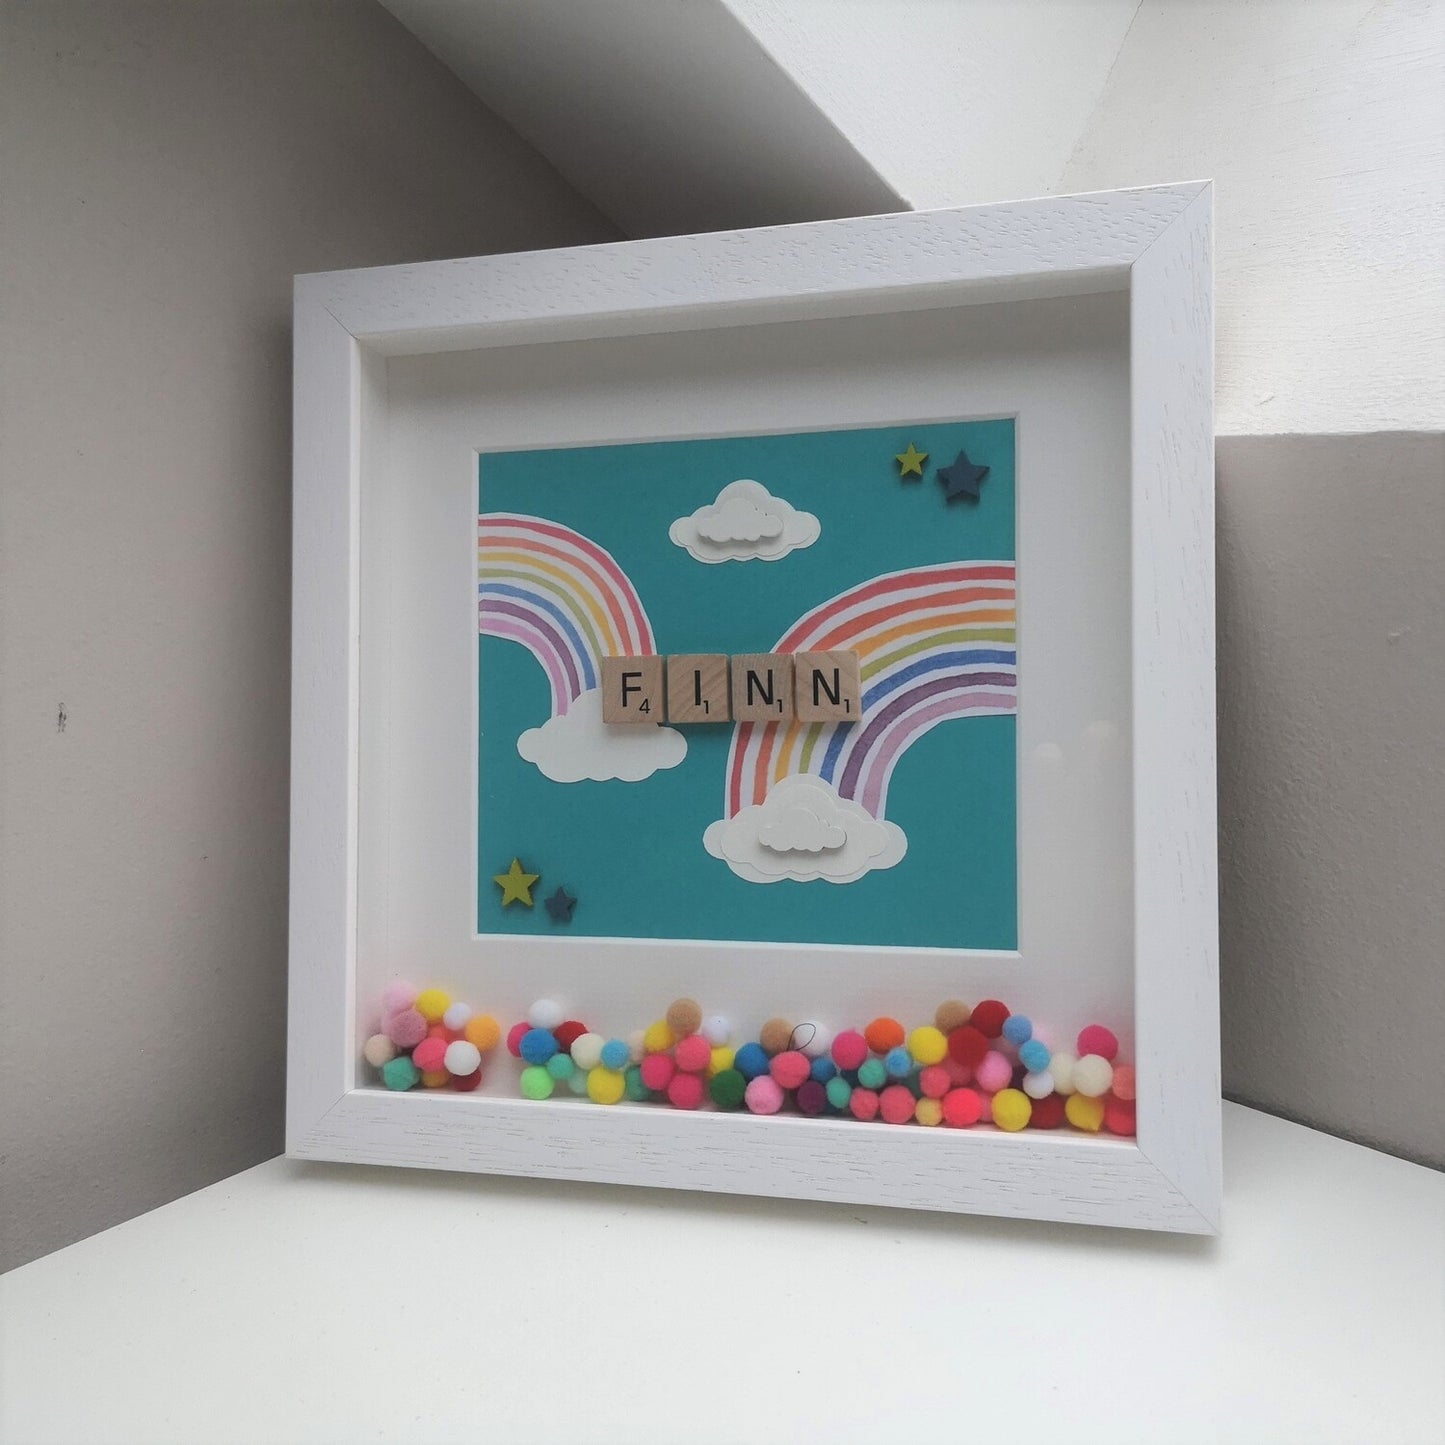 A name in wooden tiles on a  teal background with Papercut Rainbows and clouds, bright coloured pompoms and wooden clouds in a handmade 25x25cm deep box wooden frame.